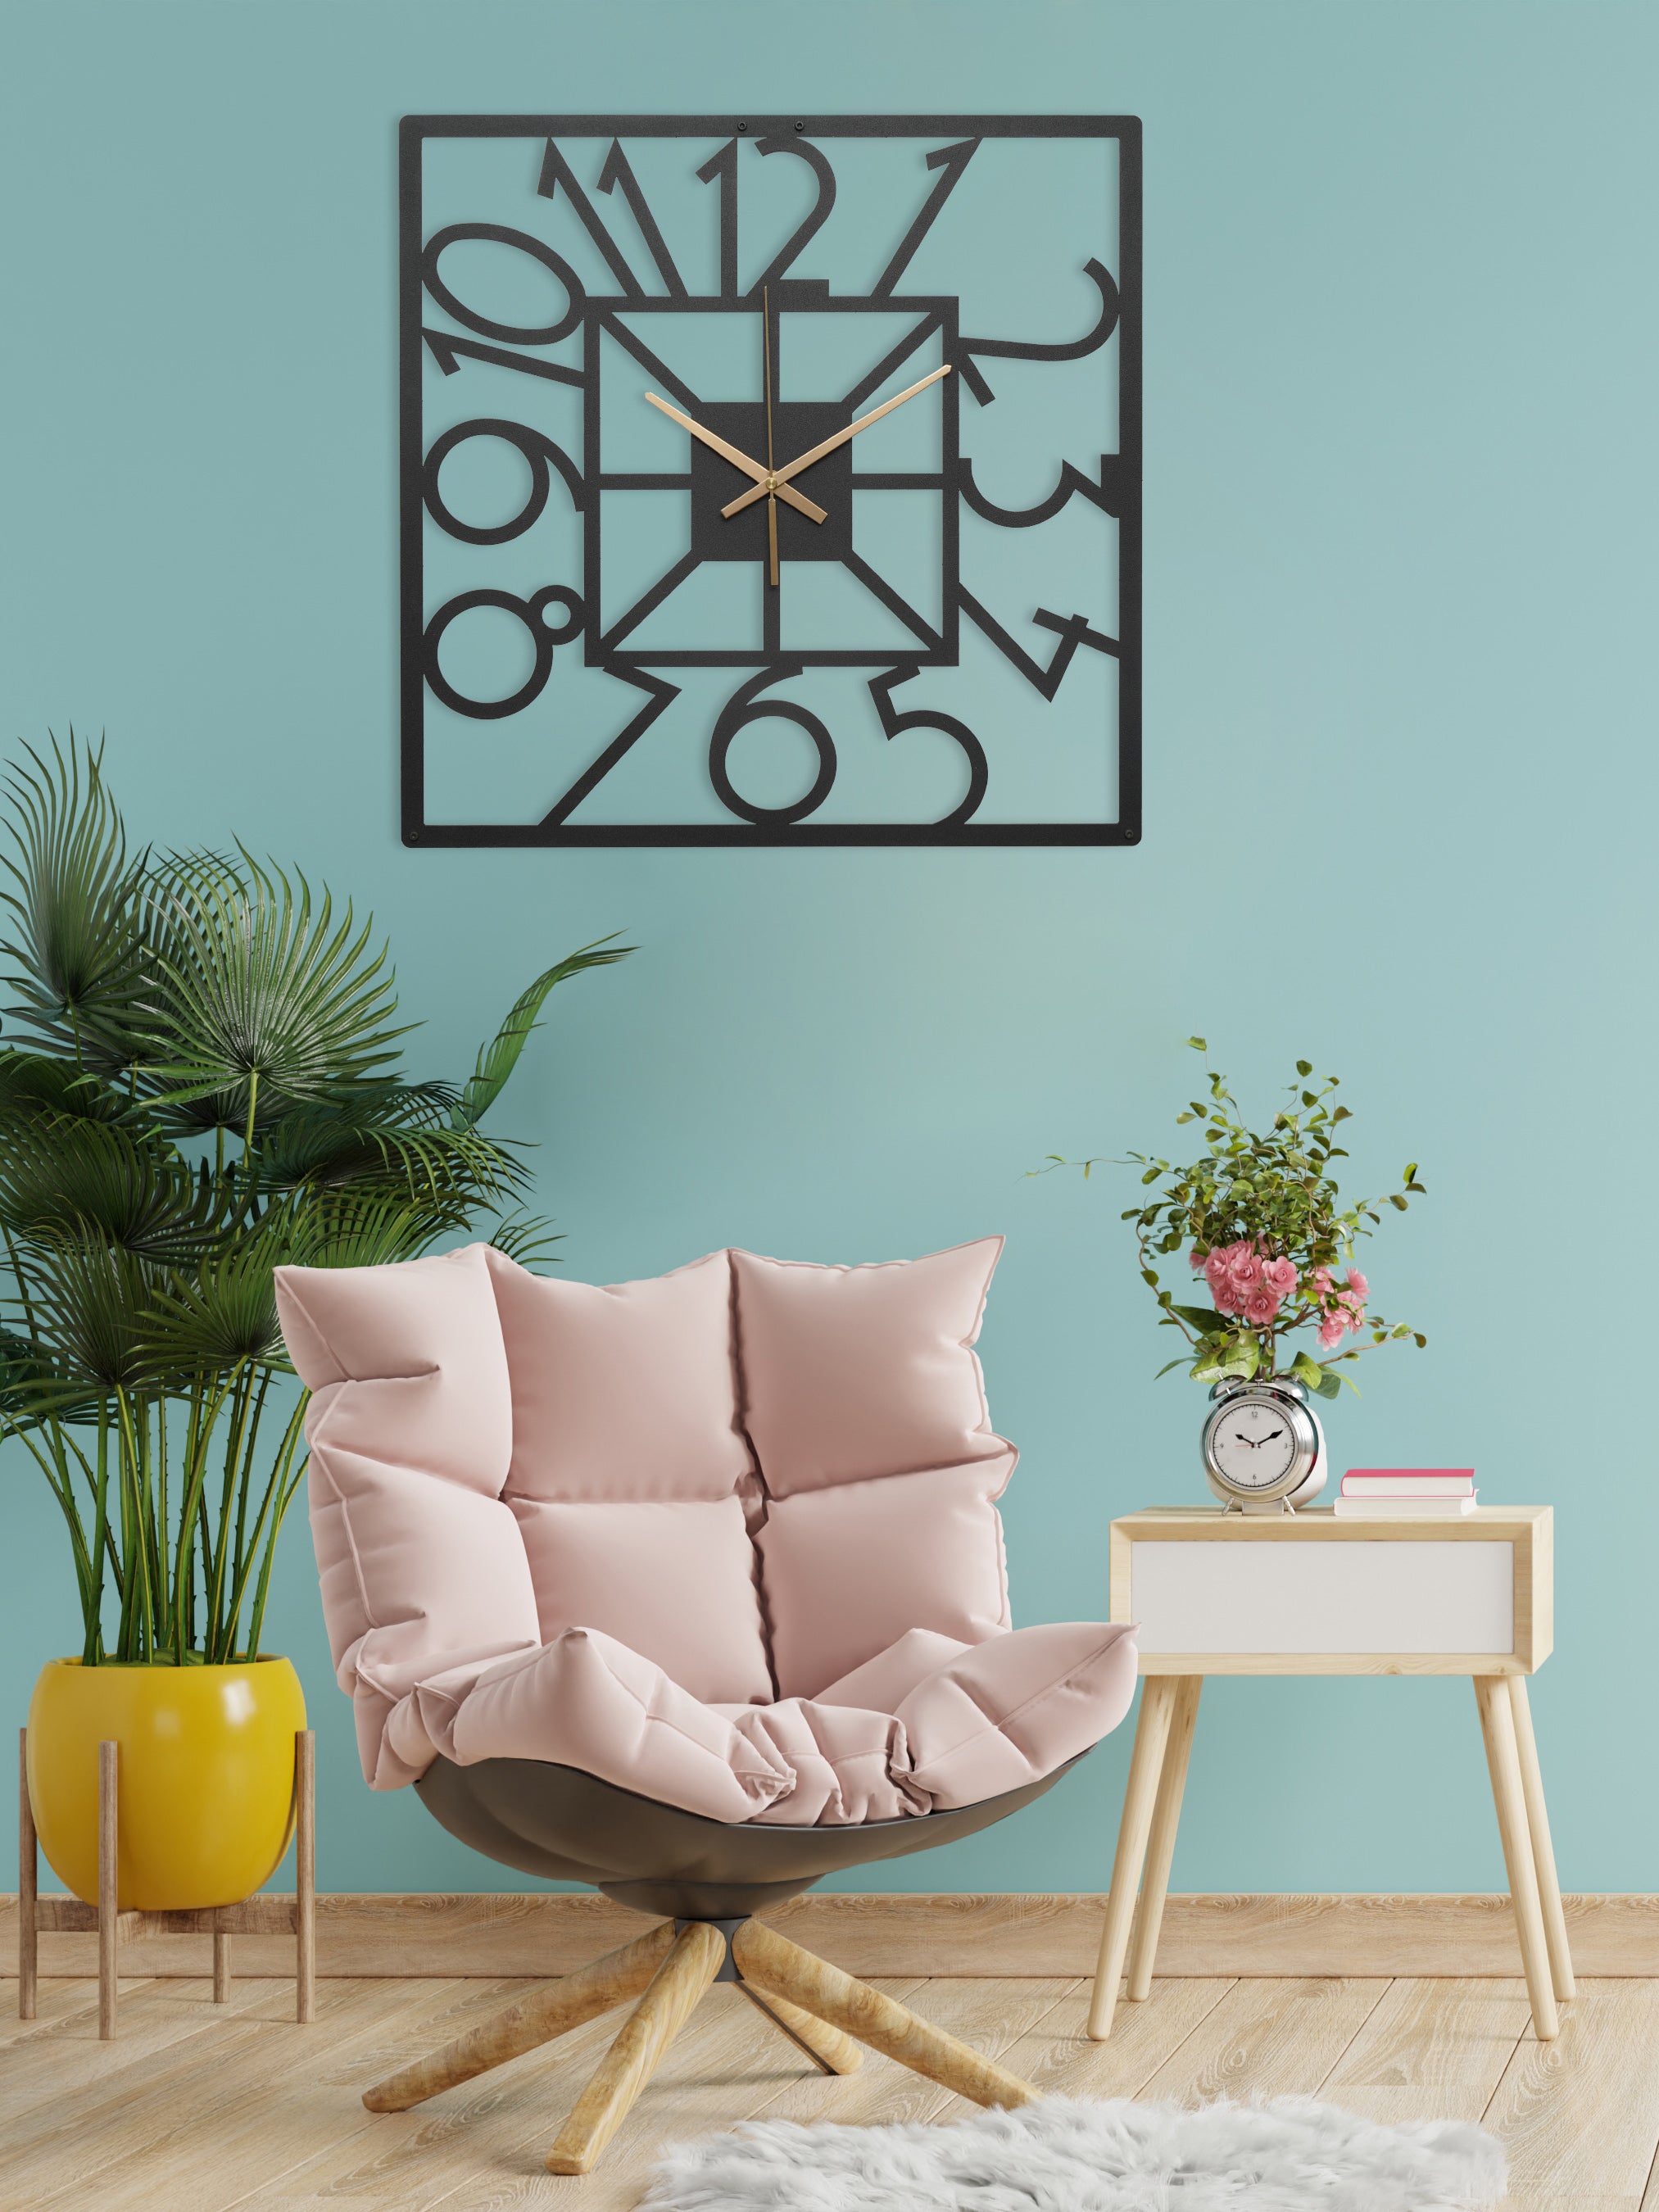 Square Wall Clock With Numbers